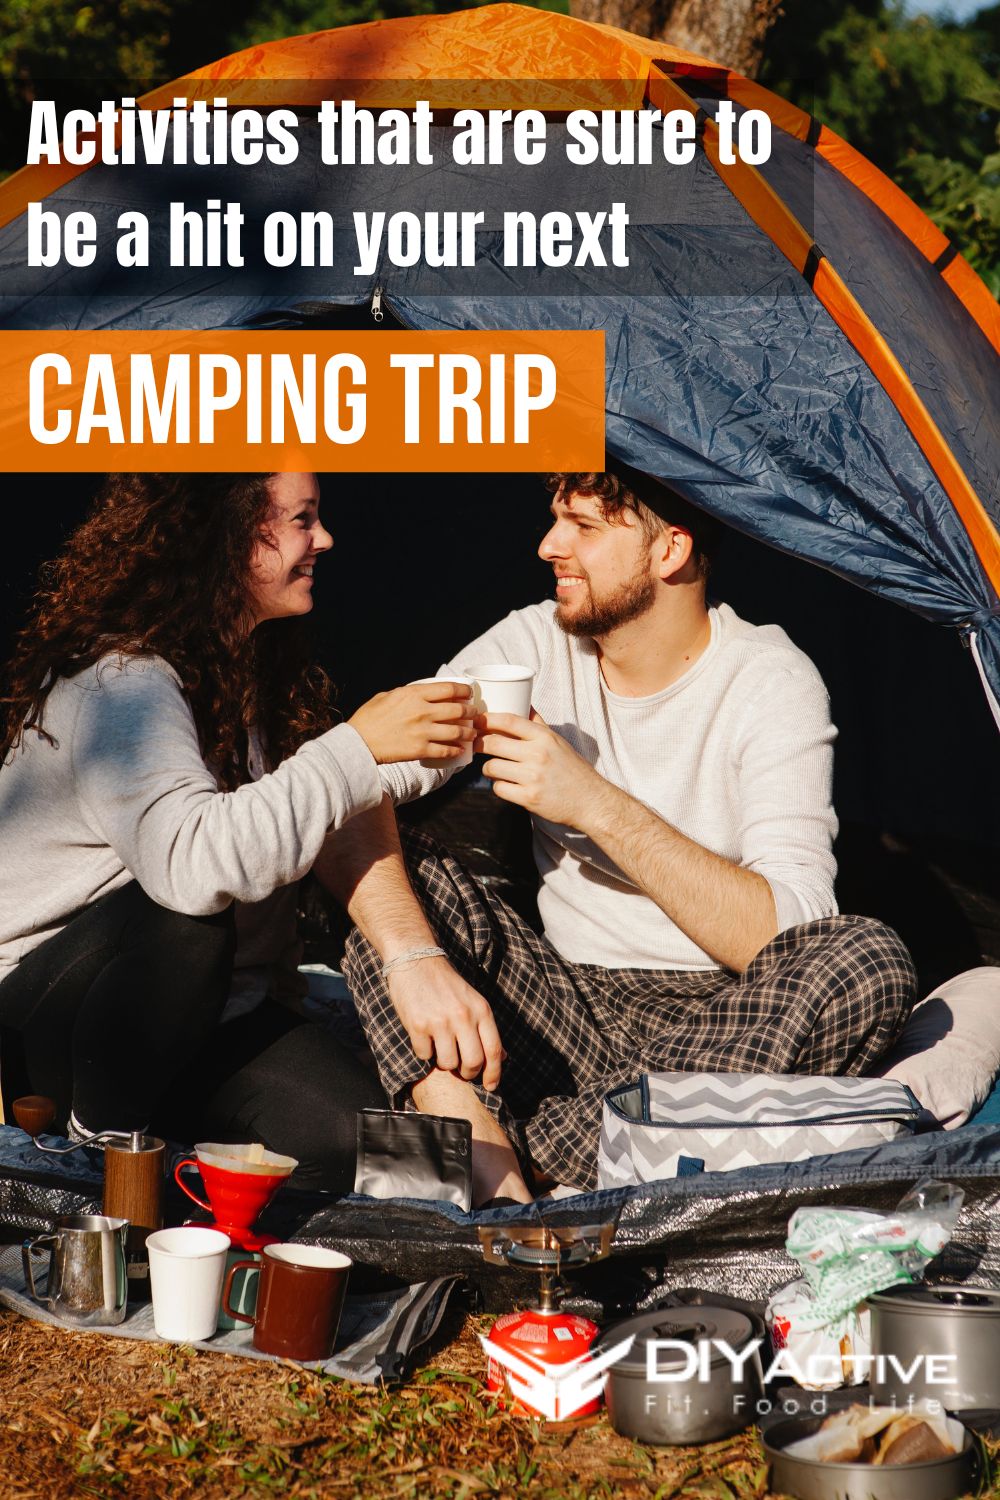 Happy Campers 6 Activities That Are Sure to Be a Hit on Your Next Camping Trip 2